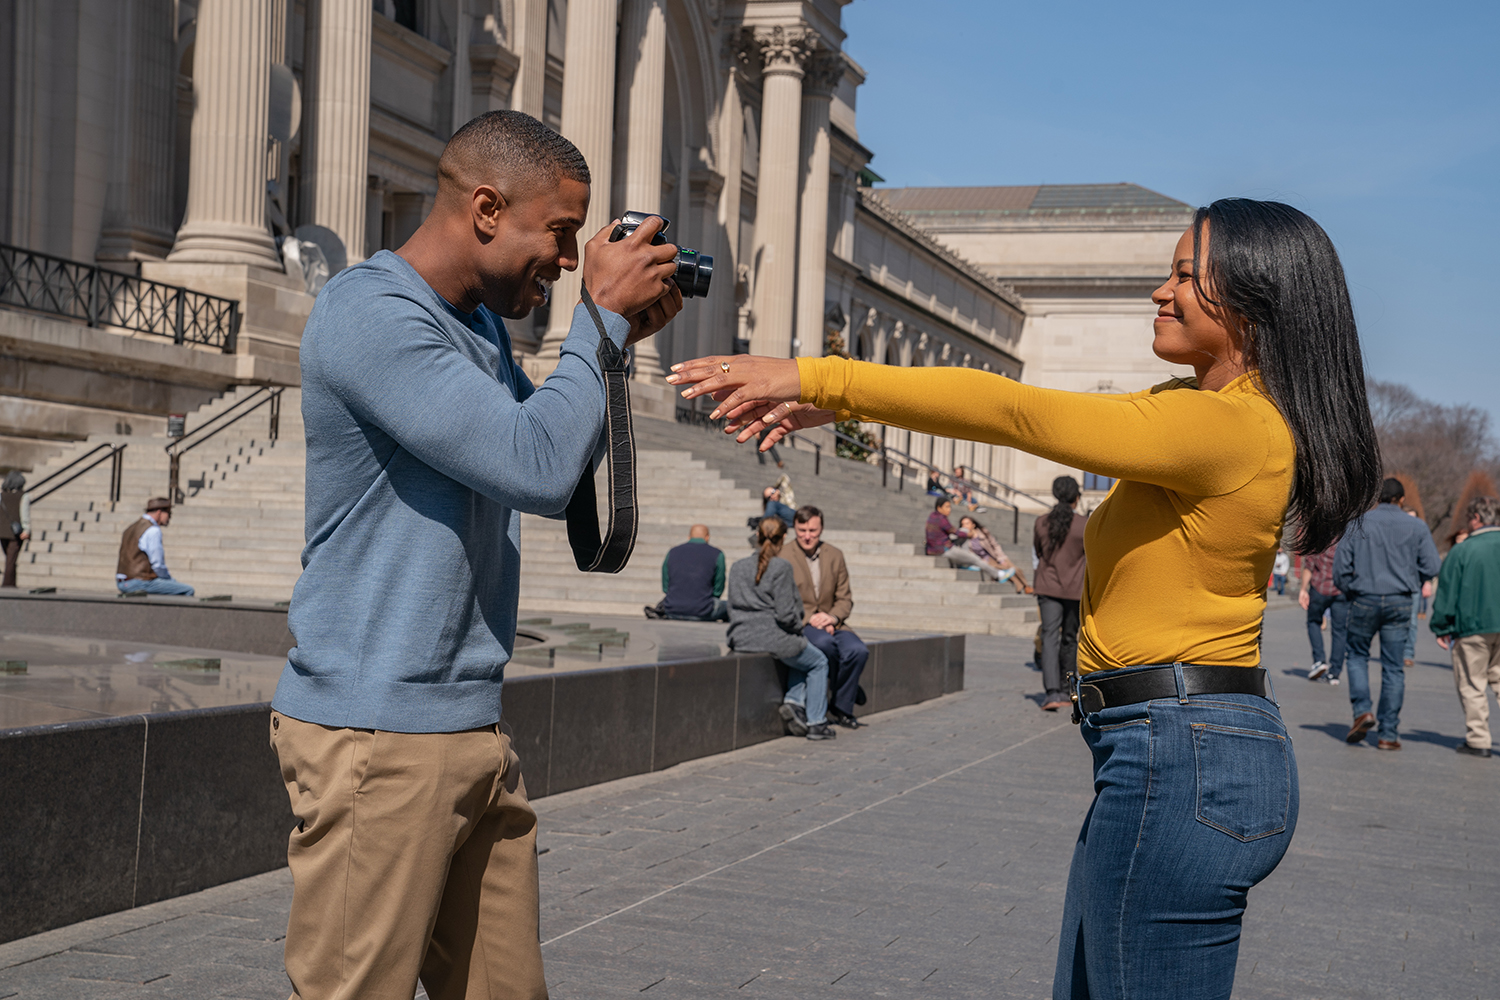 Charles Monroe King, played by Michael B. Jordan, and Dana Canedy, played by Chanté Adams, in Columbia Pictures' "Journal for Jordan." Screengrab from the film courtesy of Sony Pictures